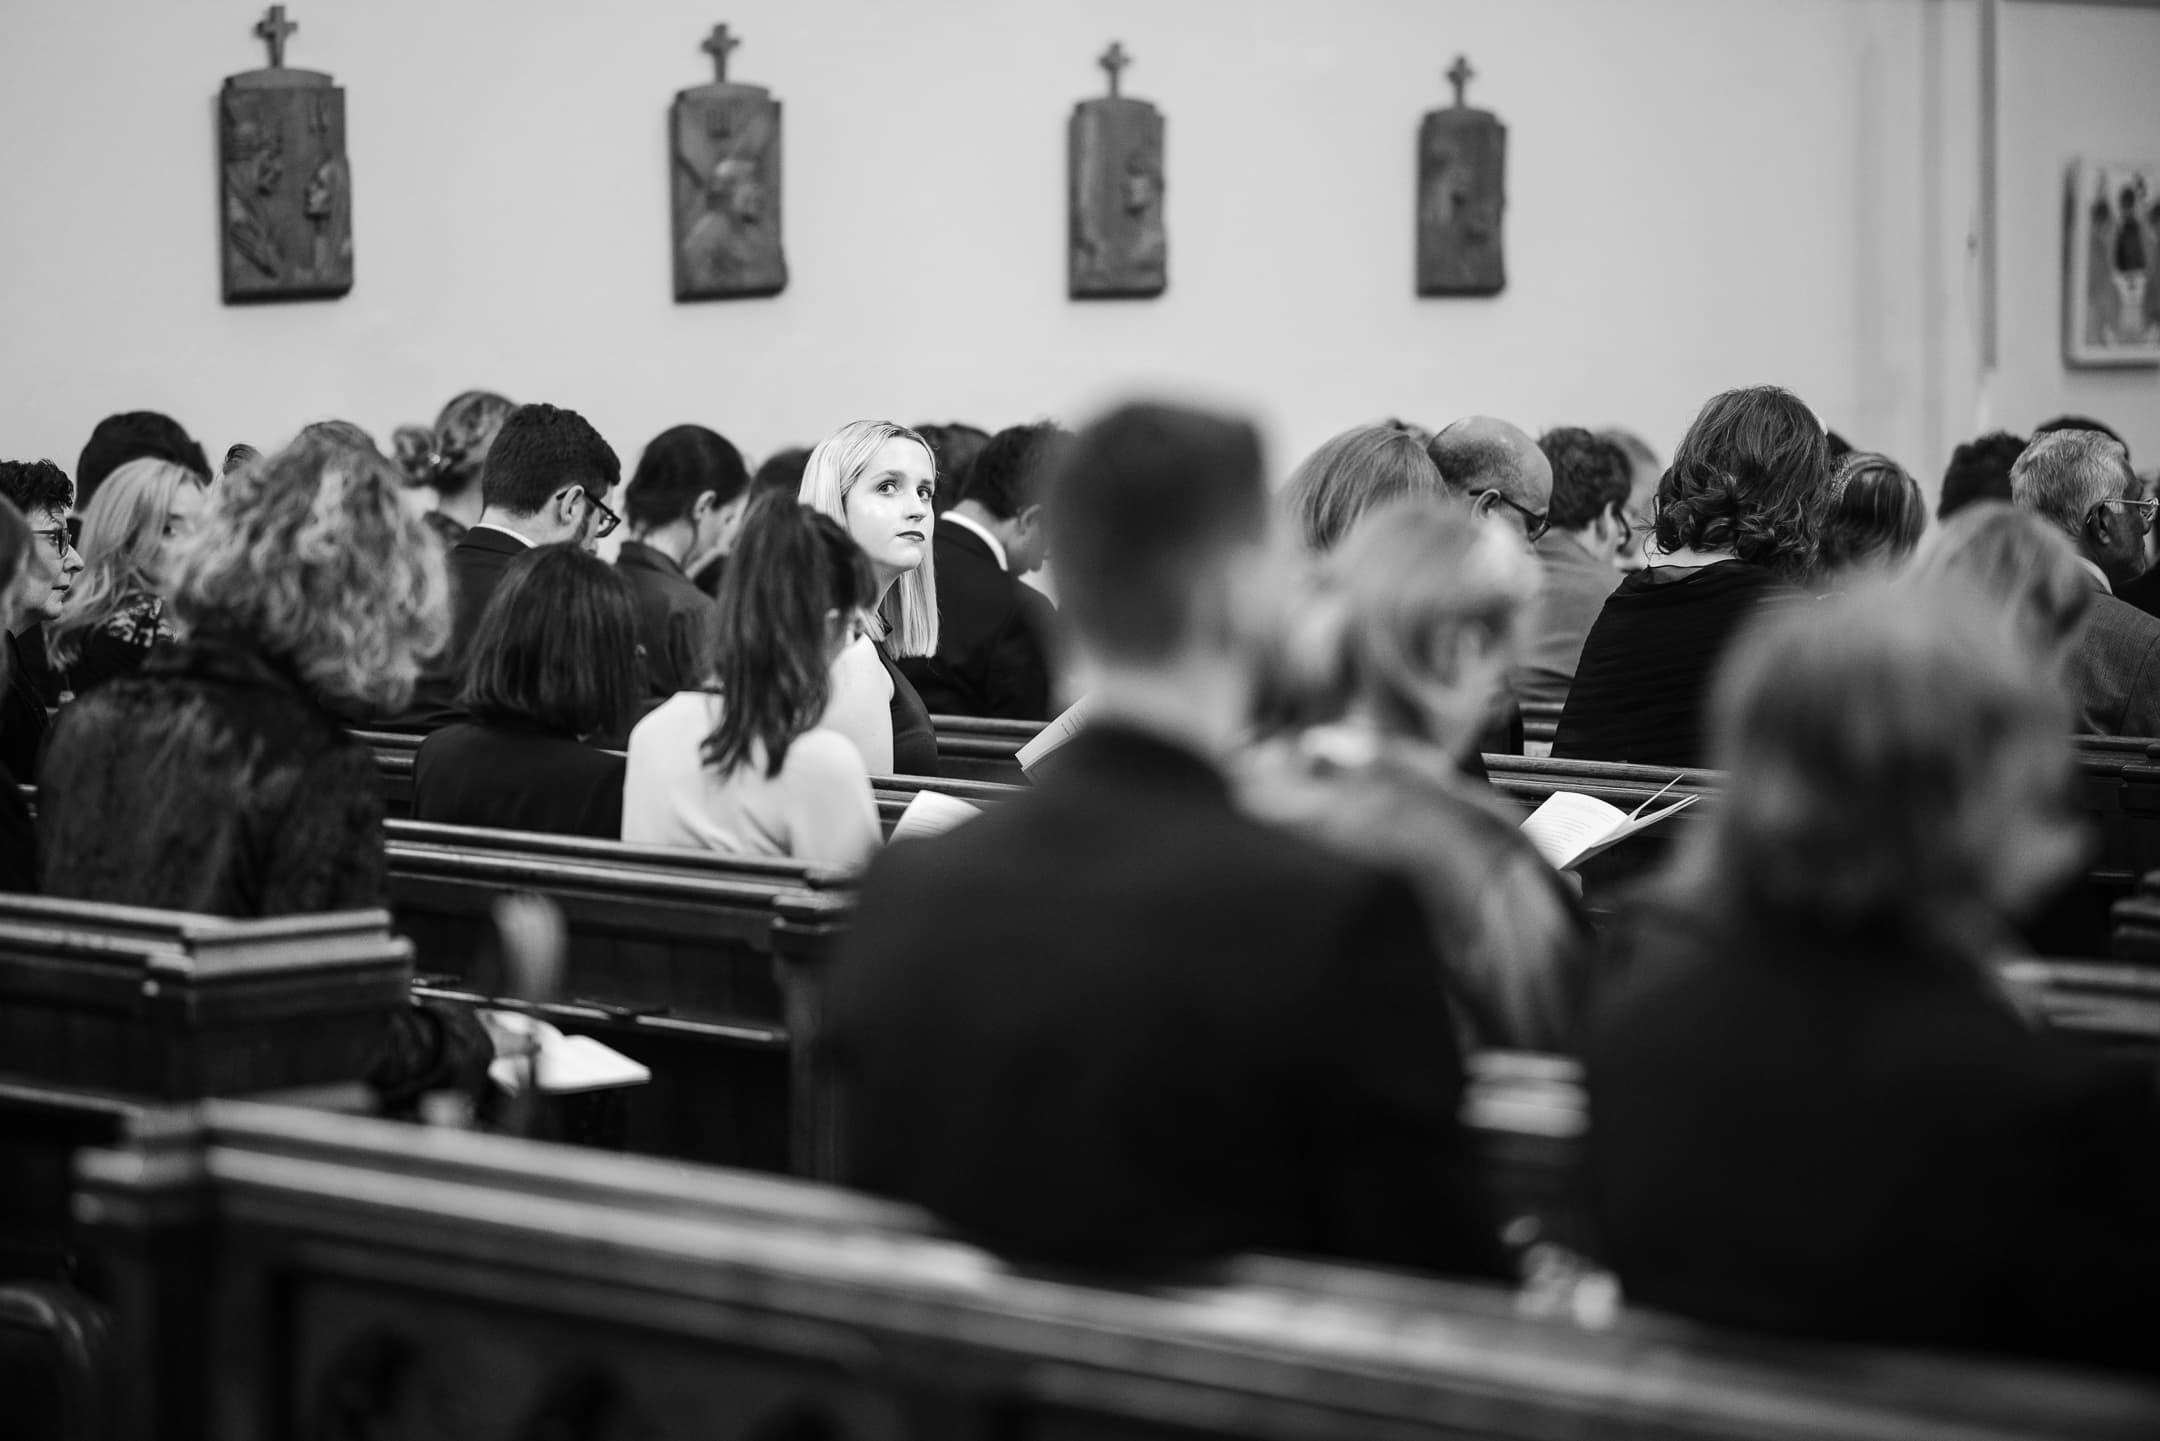 Guest looks back during the wedding service at St Mary Magdalen Church Oxford